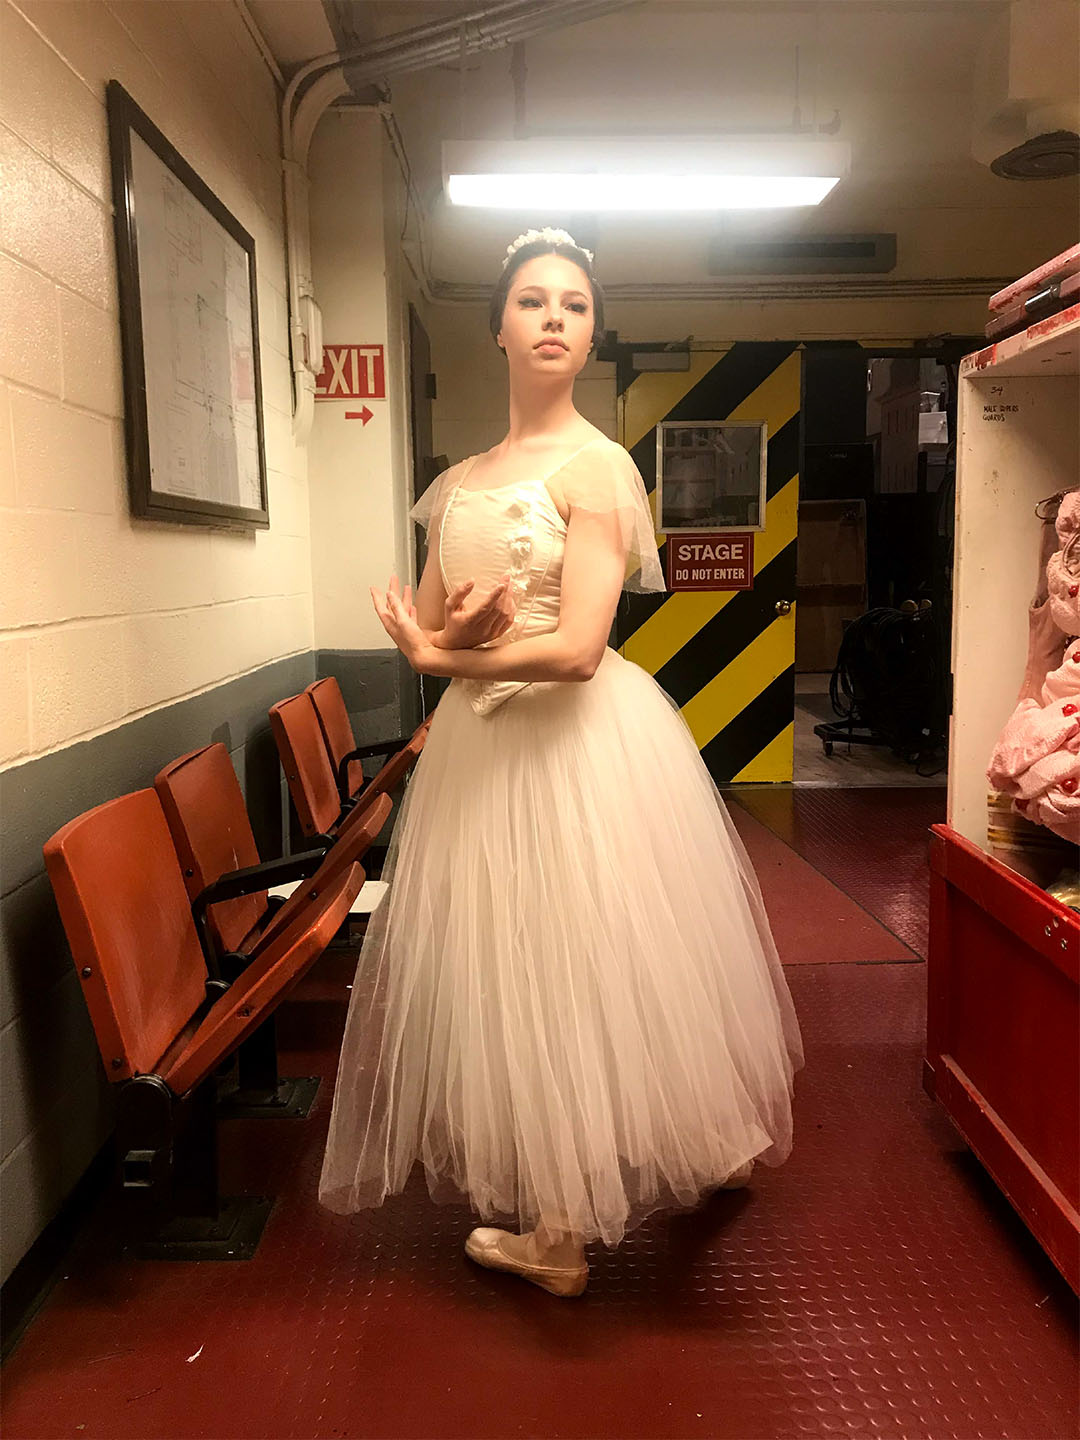 Sierra Armstrong in costume as a Wili in Giselle, backstage at the Metropolitan Opera House in 2018. Photo courtesy of Sierra Armstrong.